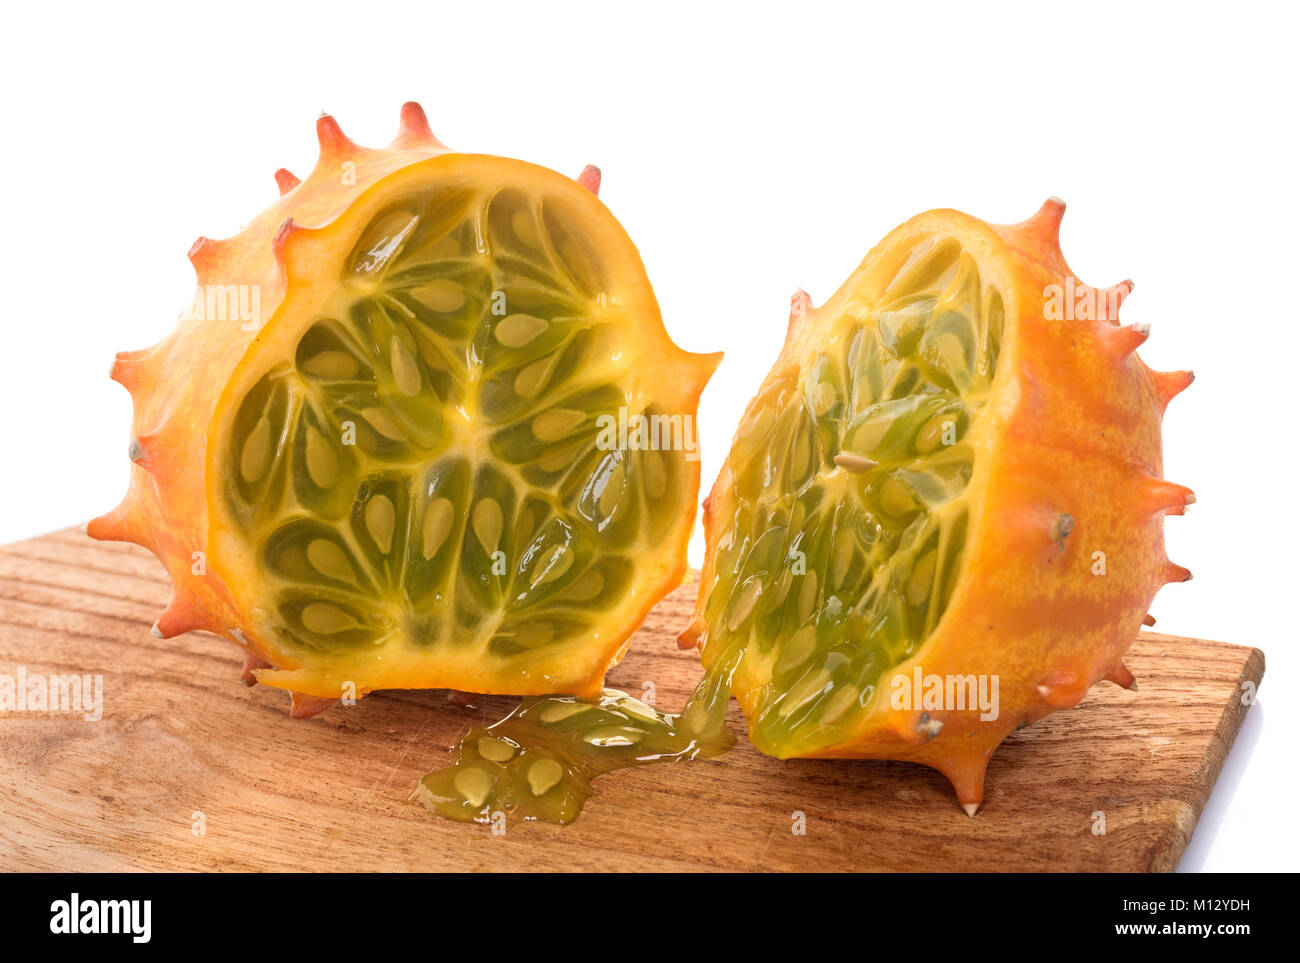 Cucumis metuliferus in front of white background Banque D'Images